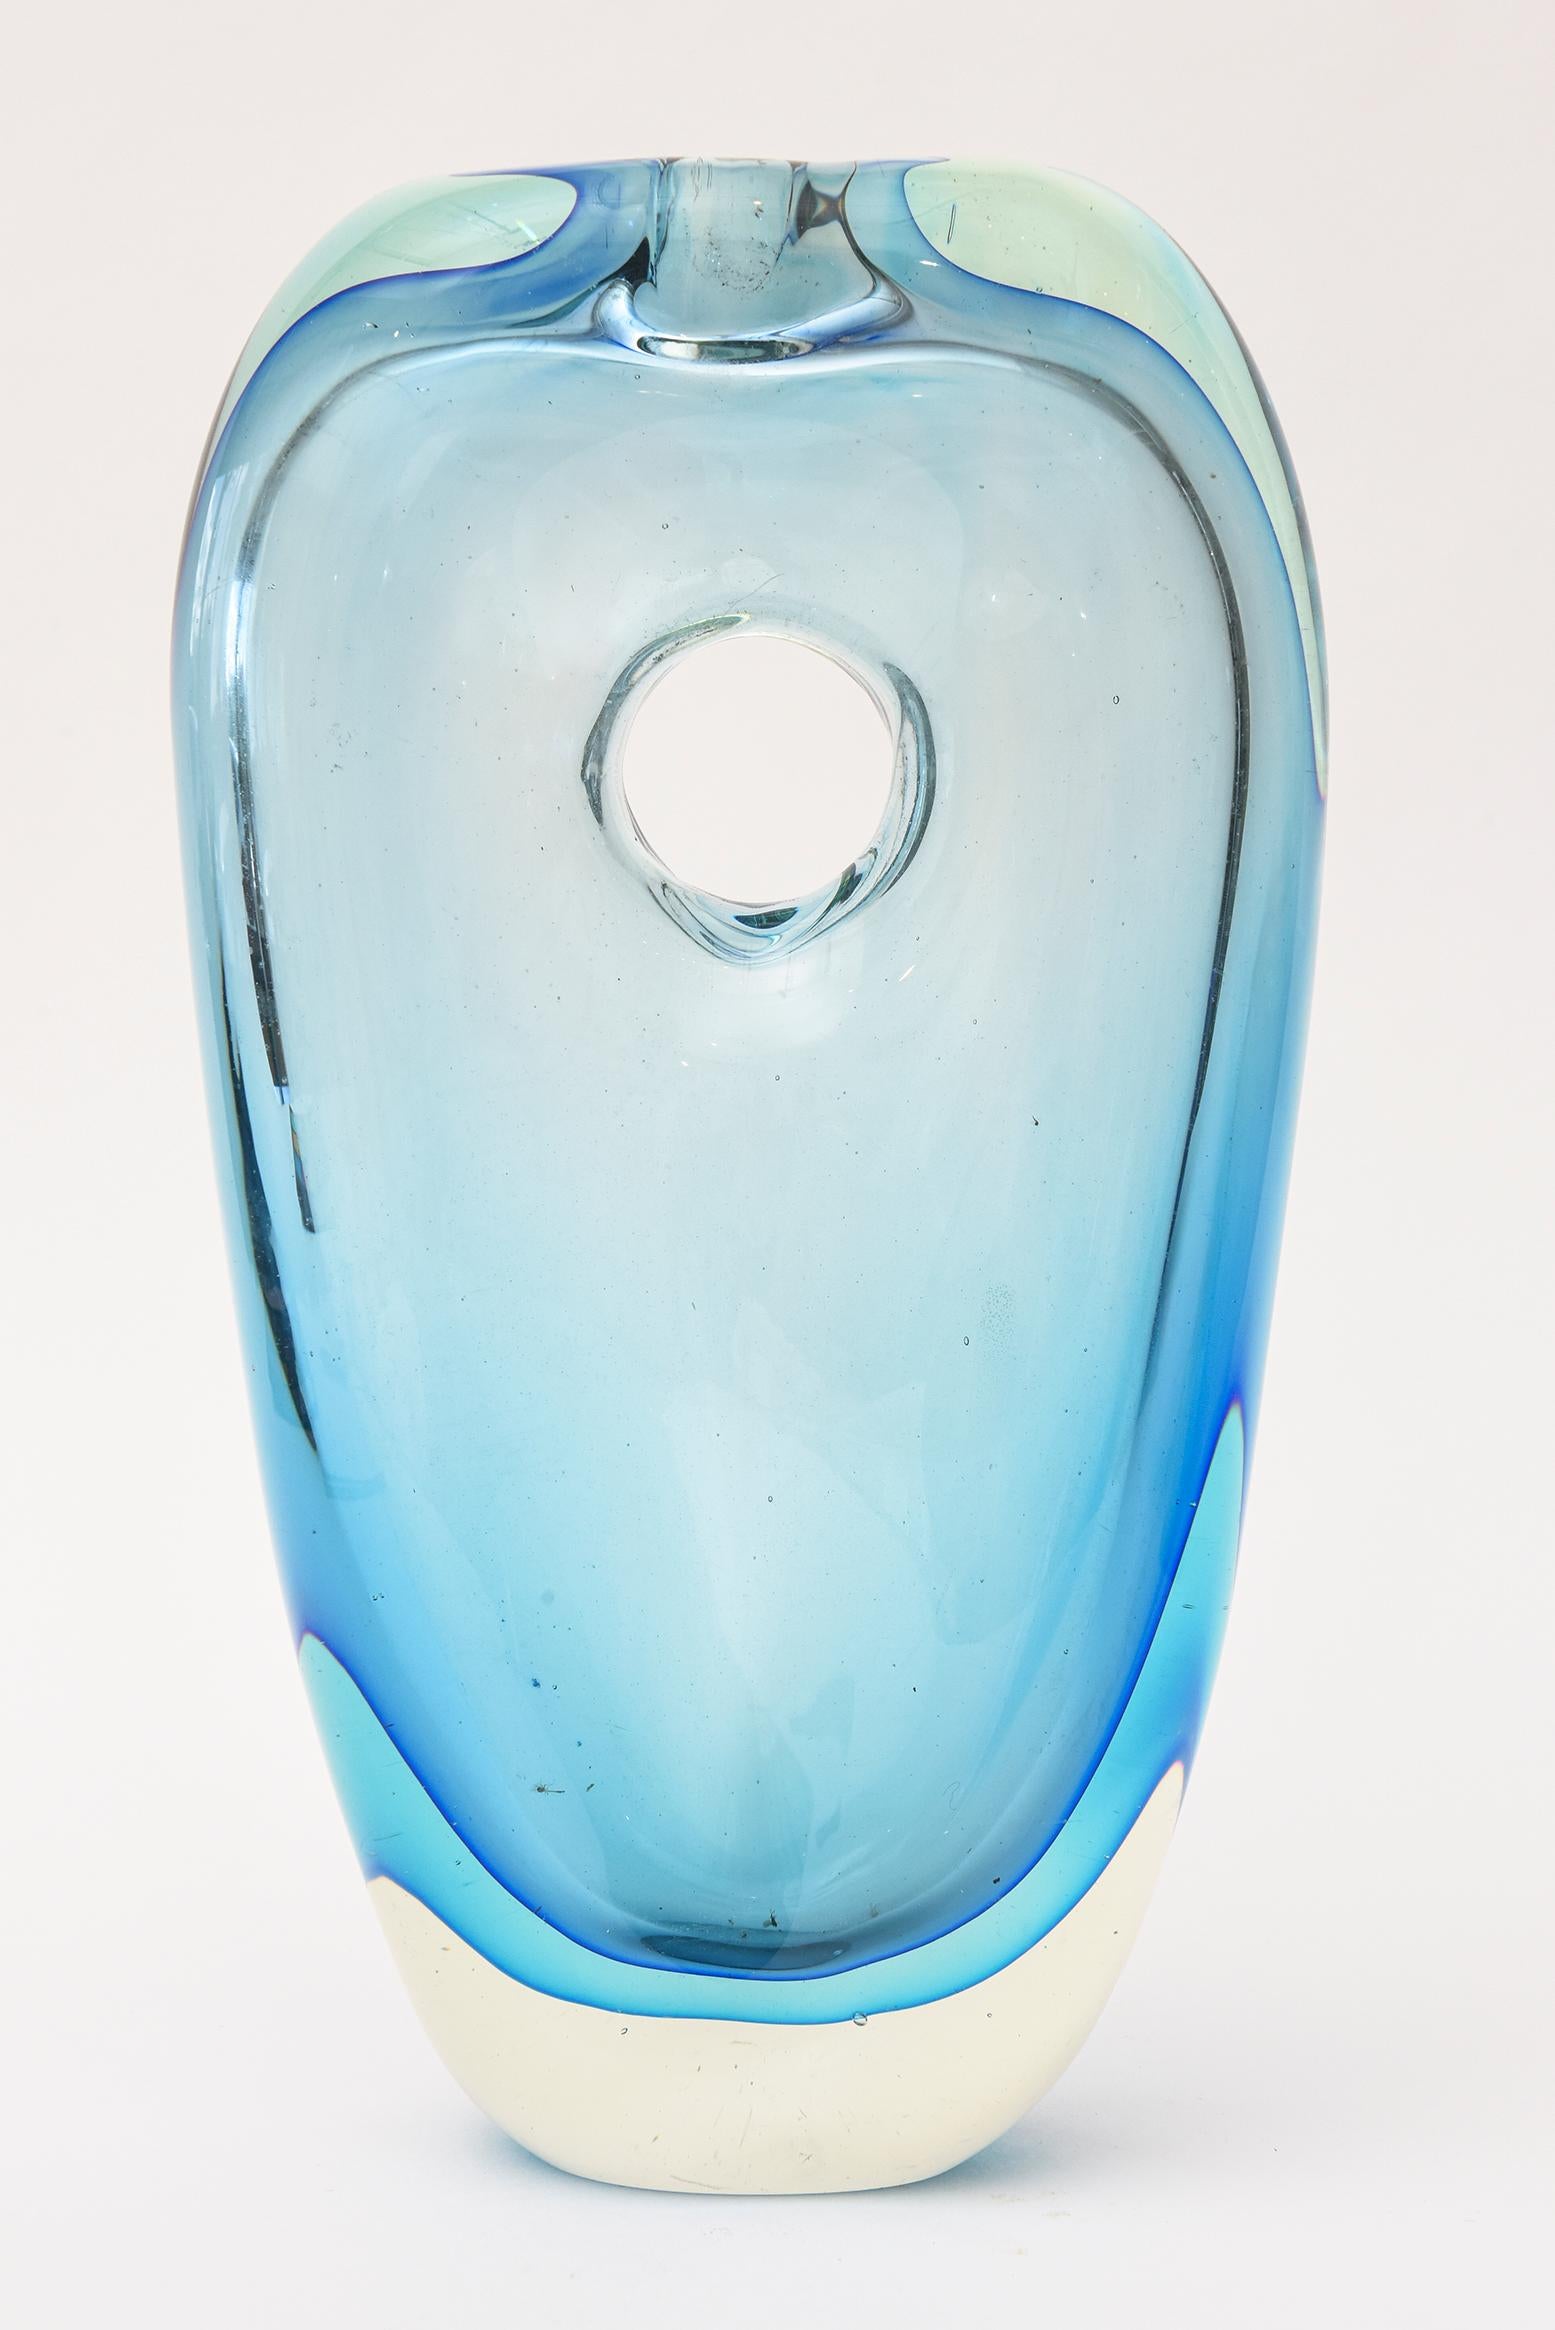 This gorgeous Italian Murano vintage Antonio da Ros for Cenedese Sommerso glass vase and or glass sculpture object has the luscious colors of blue meets turquoise meets robin’s egg blue. If you use it as a vase only a few flowers can fit as it does